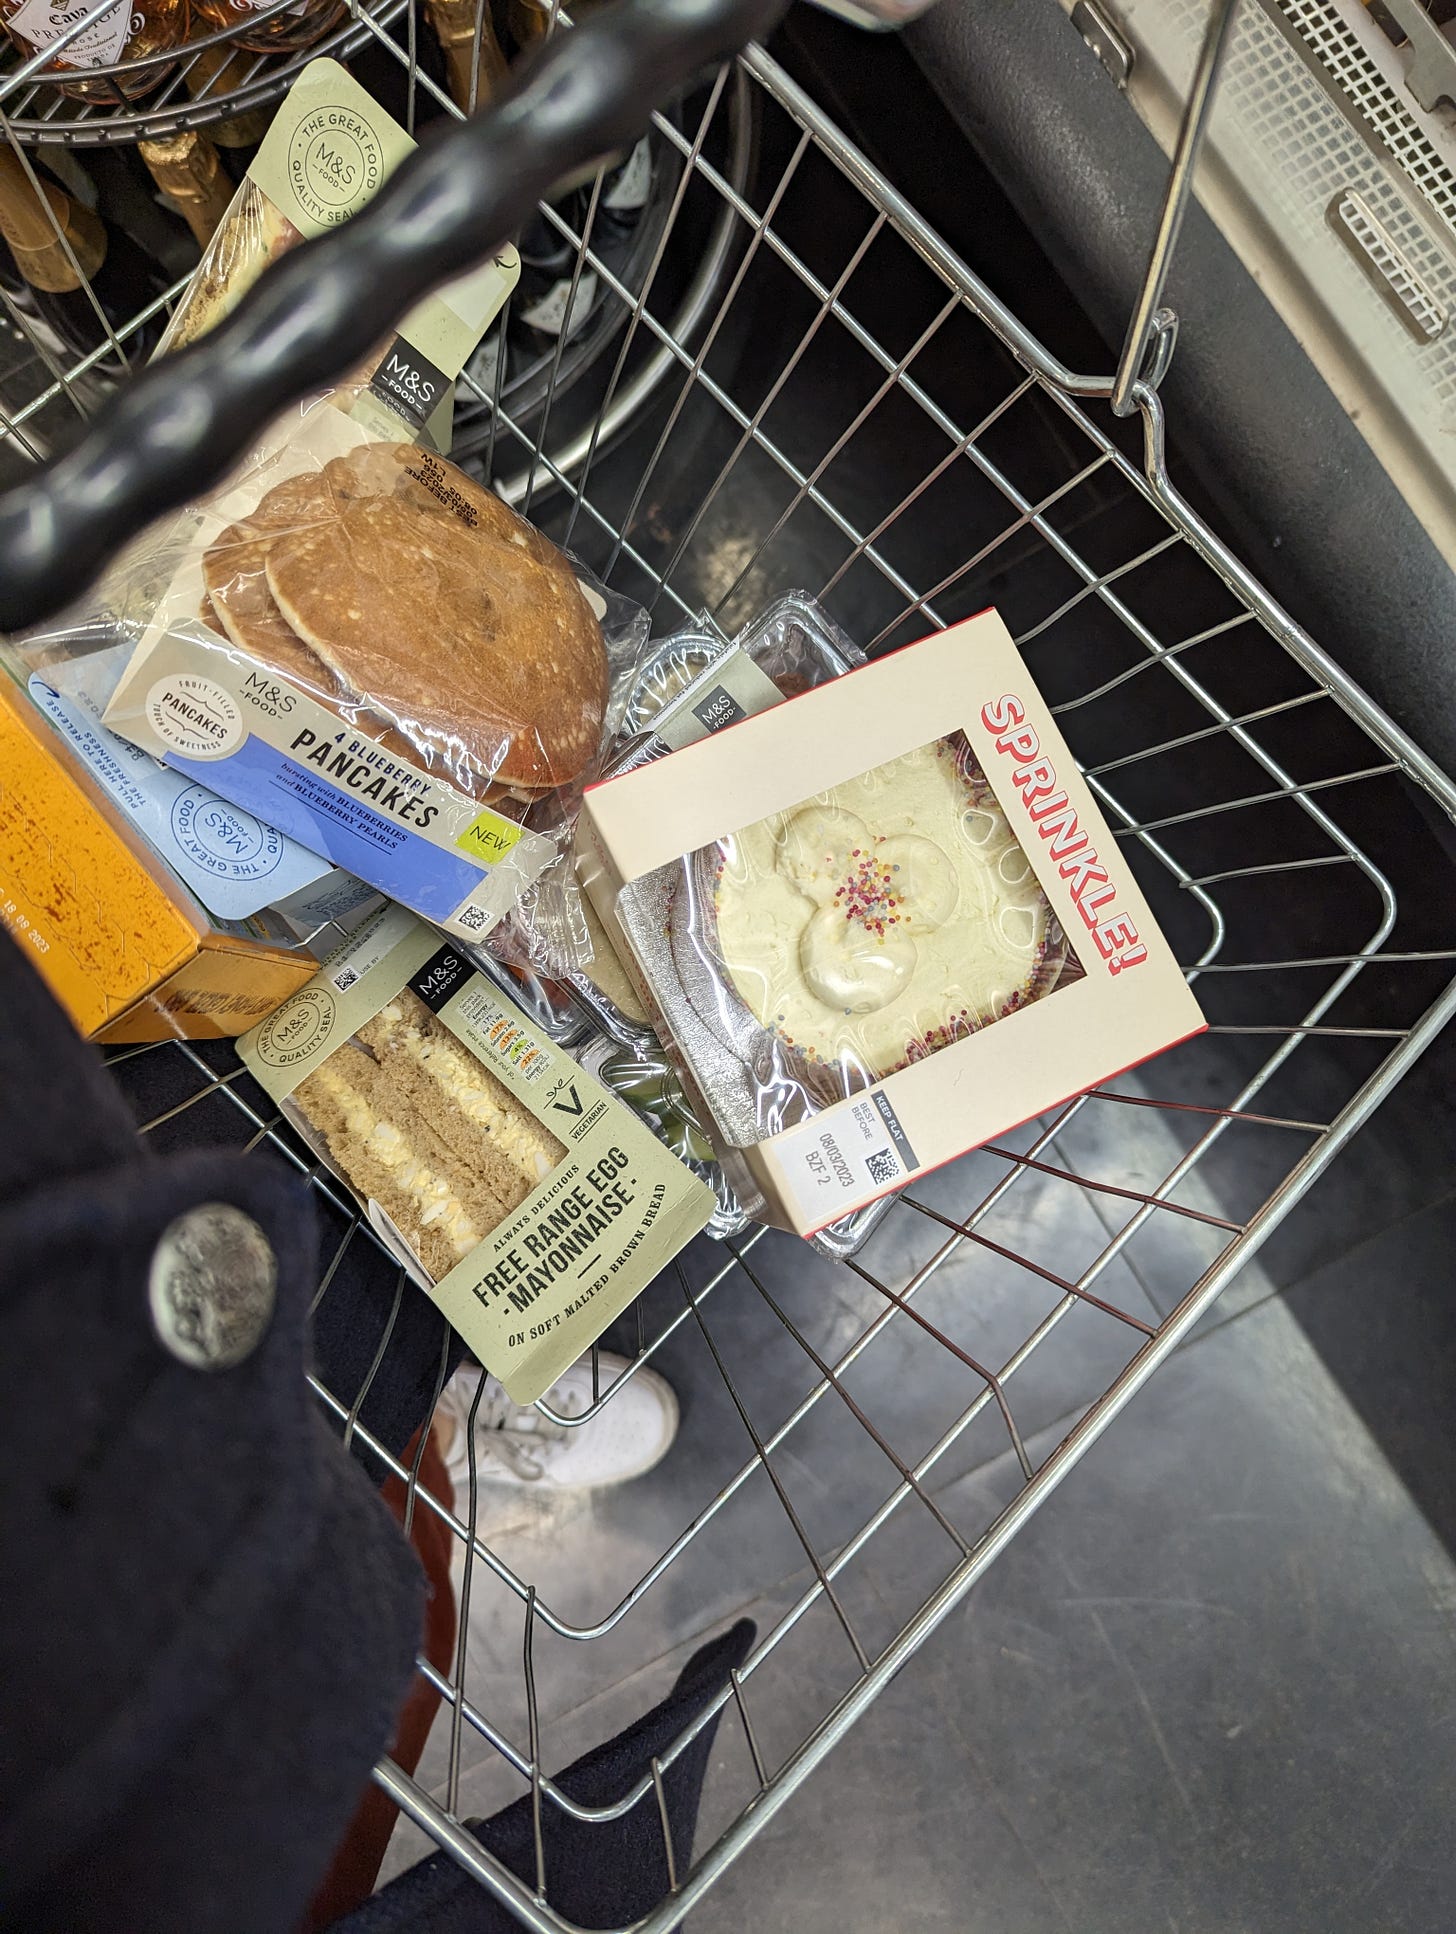 A picture of a grocery basket filled with pancakes, cakes, sandwiches and other pre-packaged products from M&S.